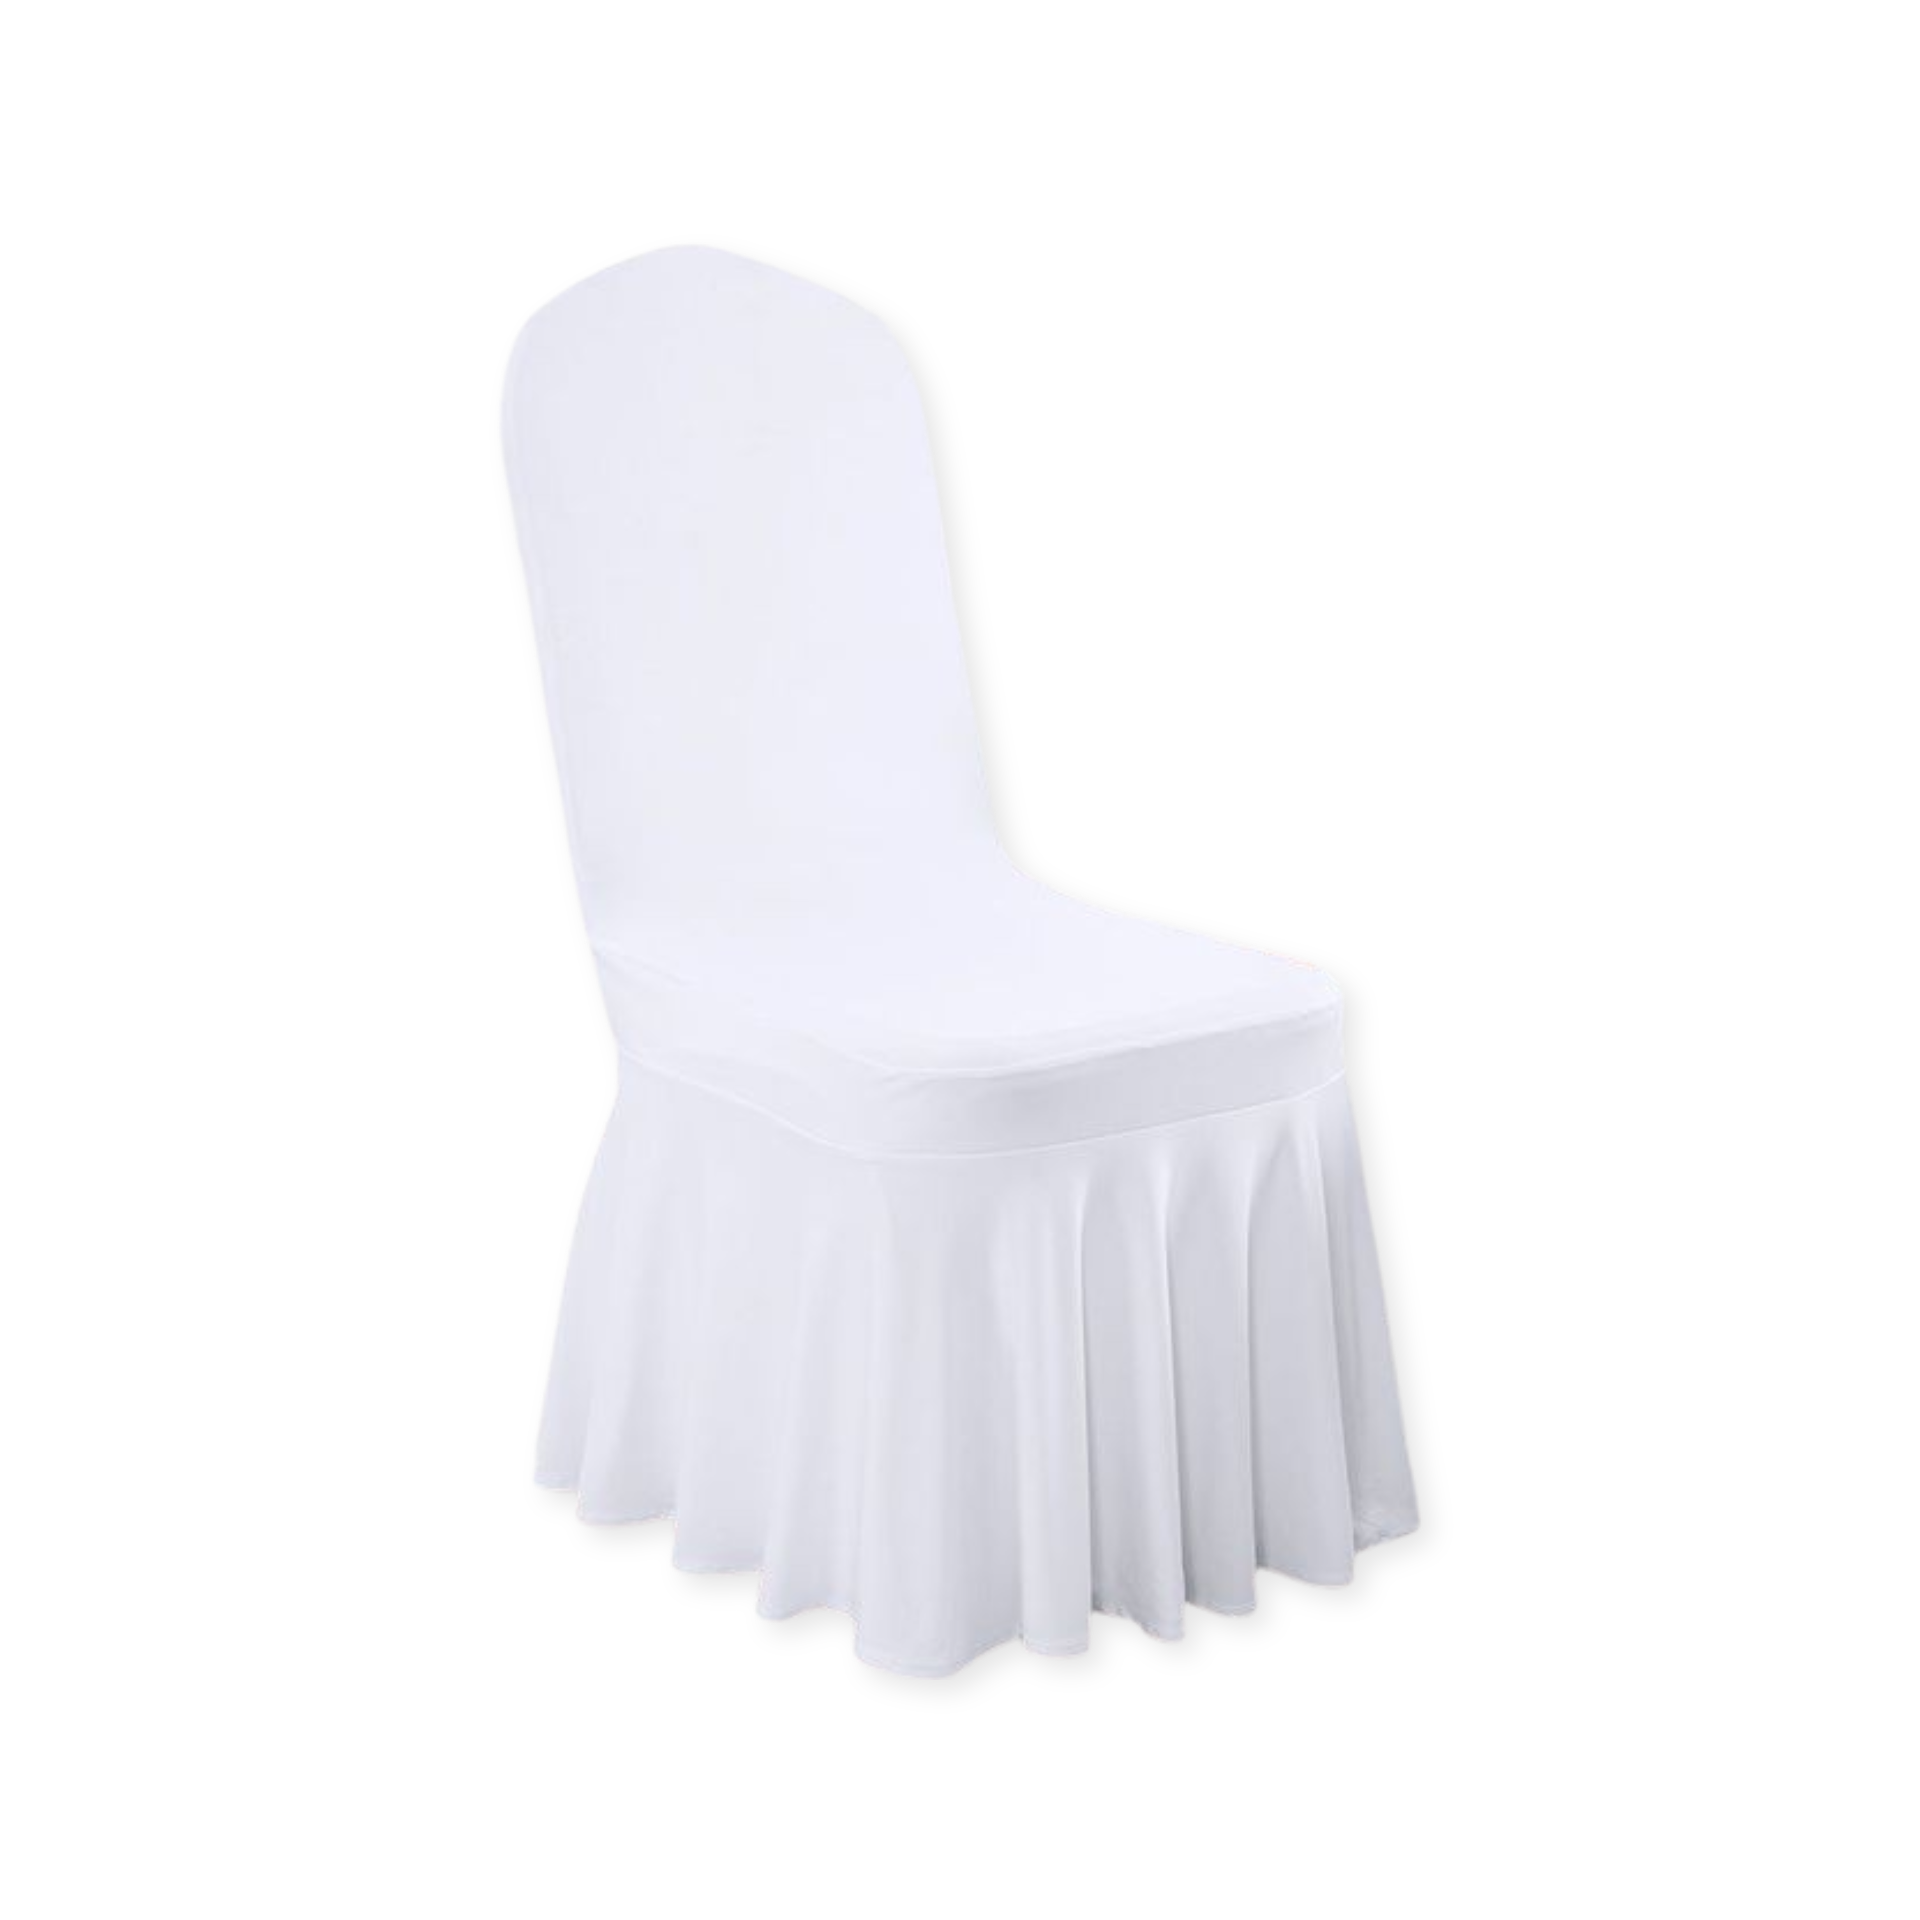 spandex white banquet chair cover rentals panama city beach wedding party event 